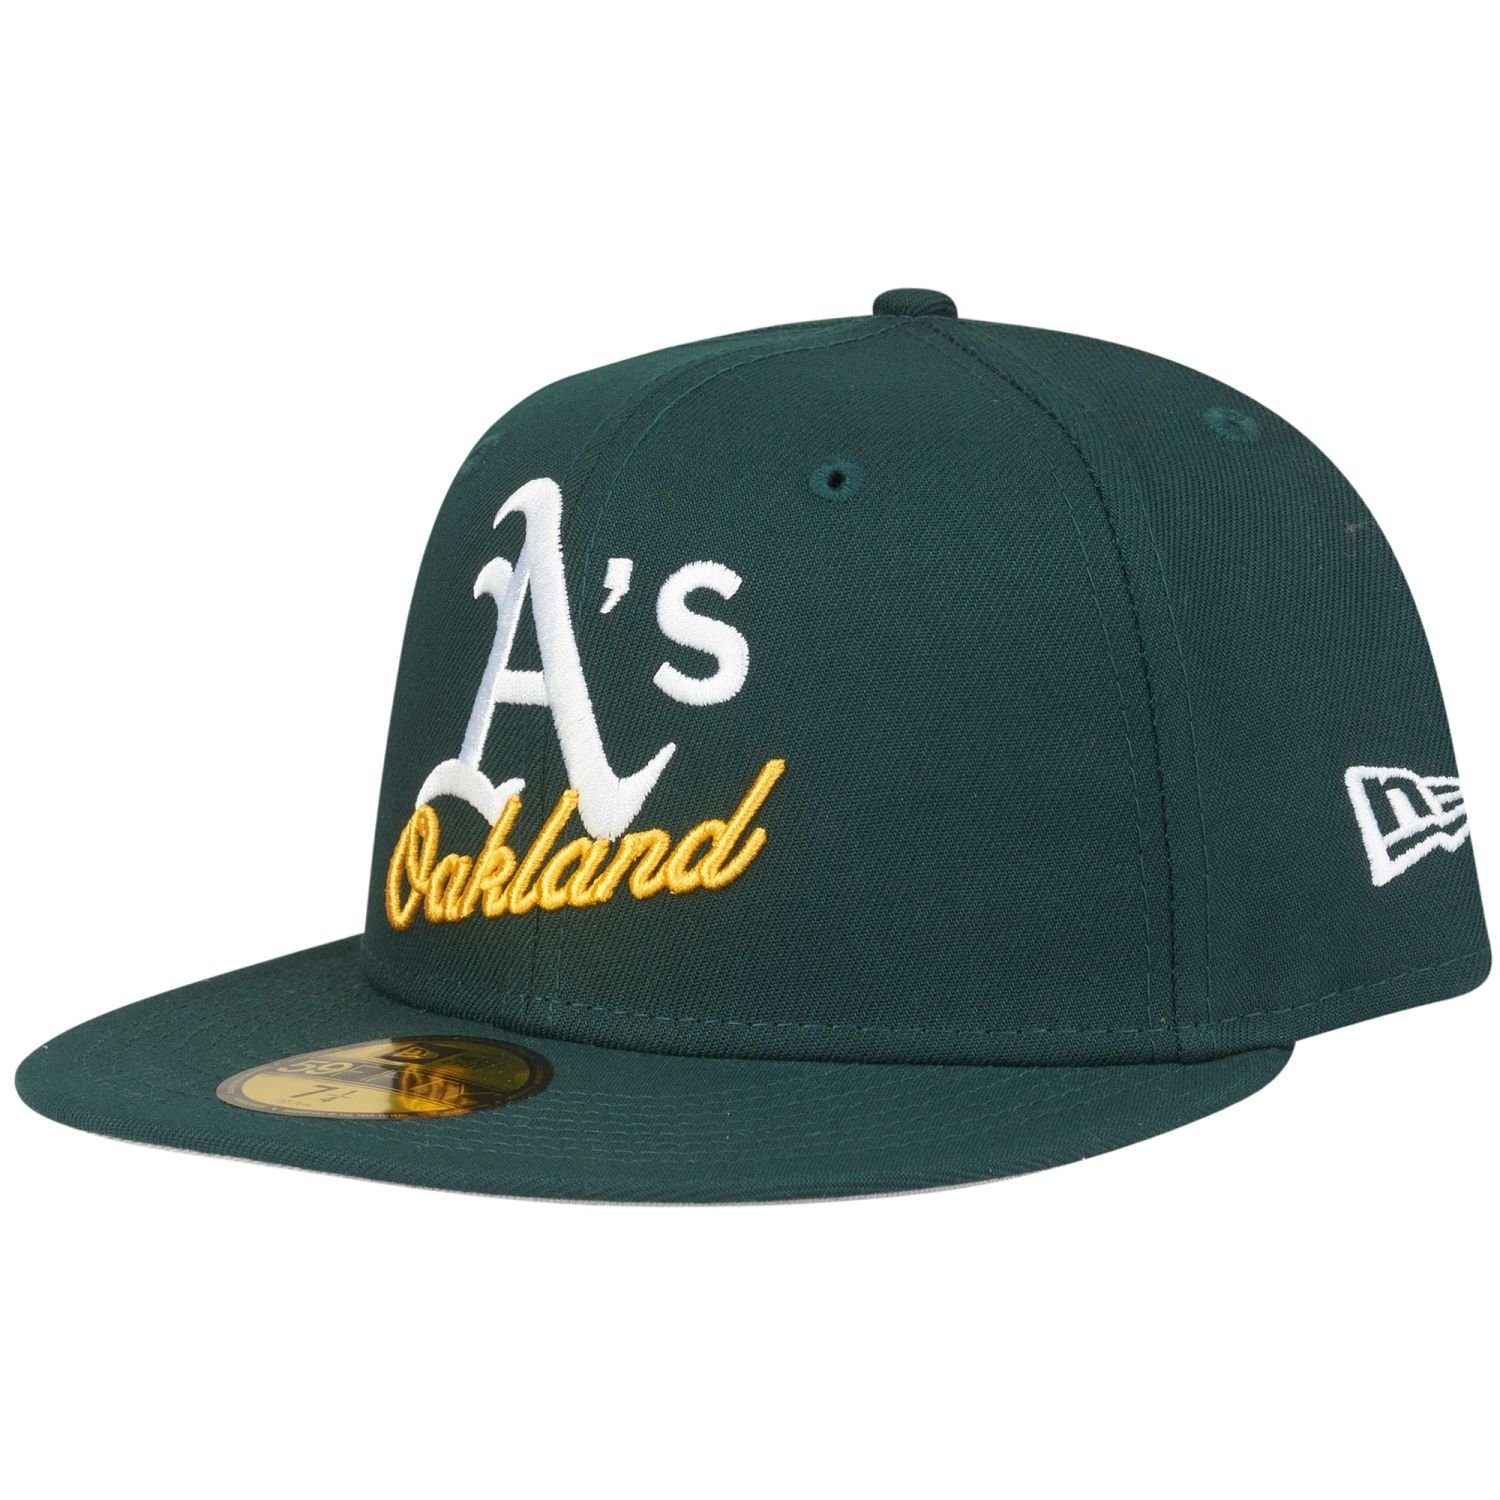 New Era Fitted Cap 59Fifty DUAL LOGO Oakland Athletics | Fitted Caps